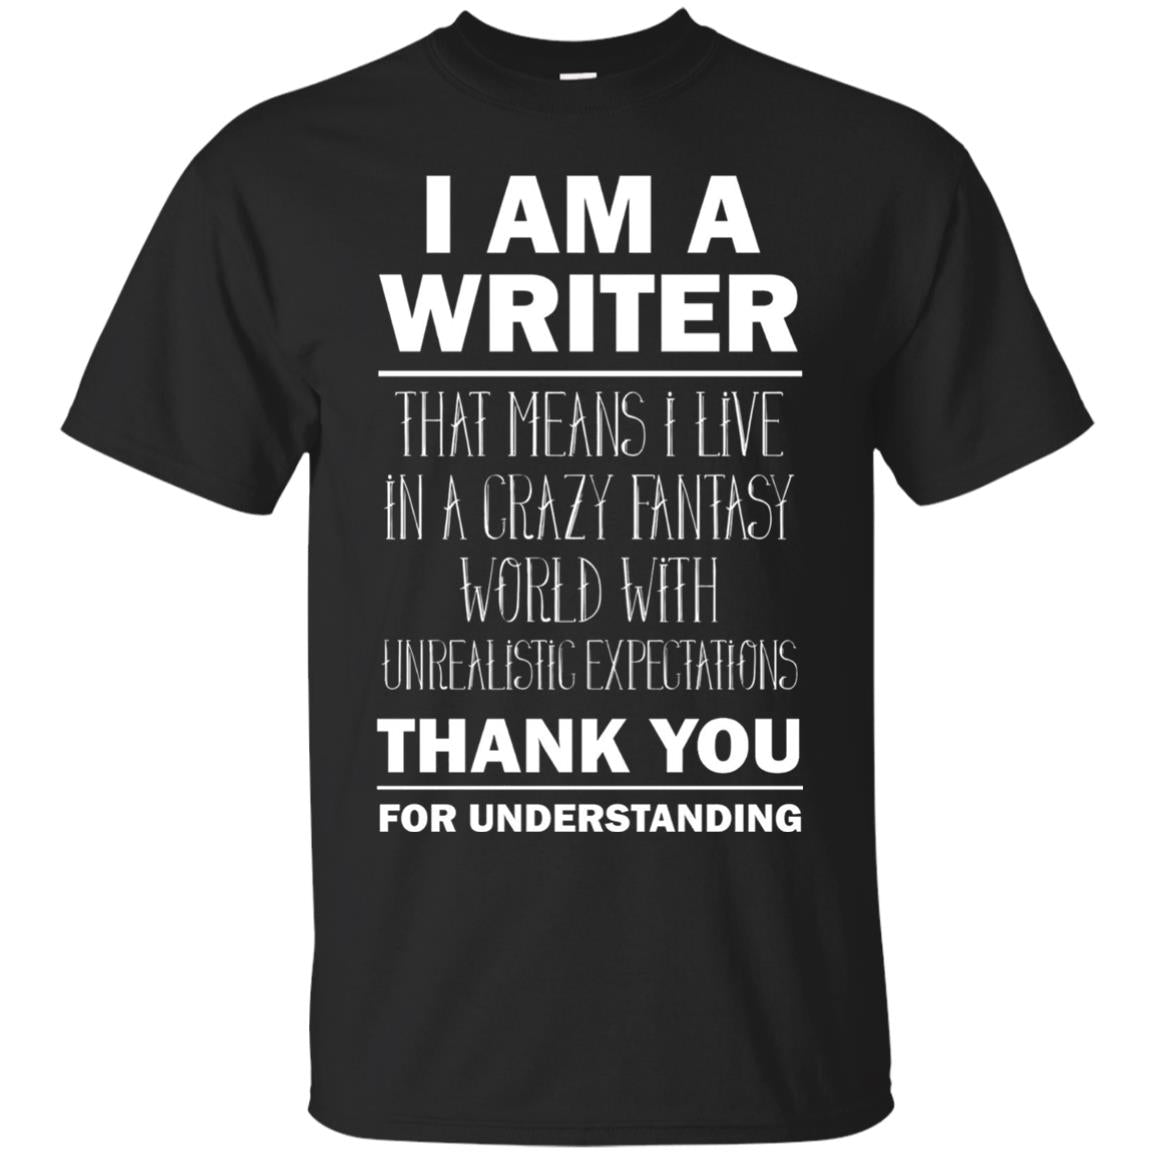 I Am A Writer That Means I Live In A Crazy Fantasy World With Unrealitic Expectations Thank You For Understanding